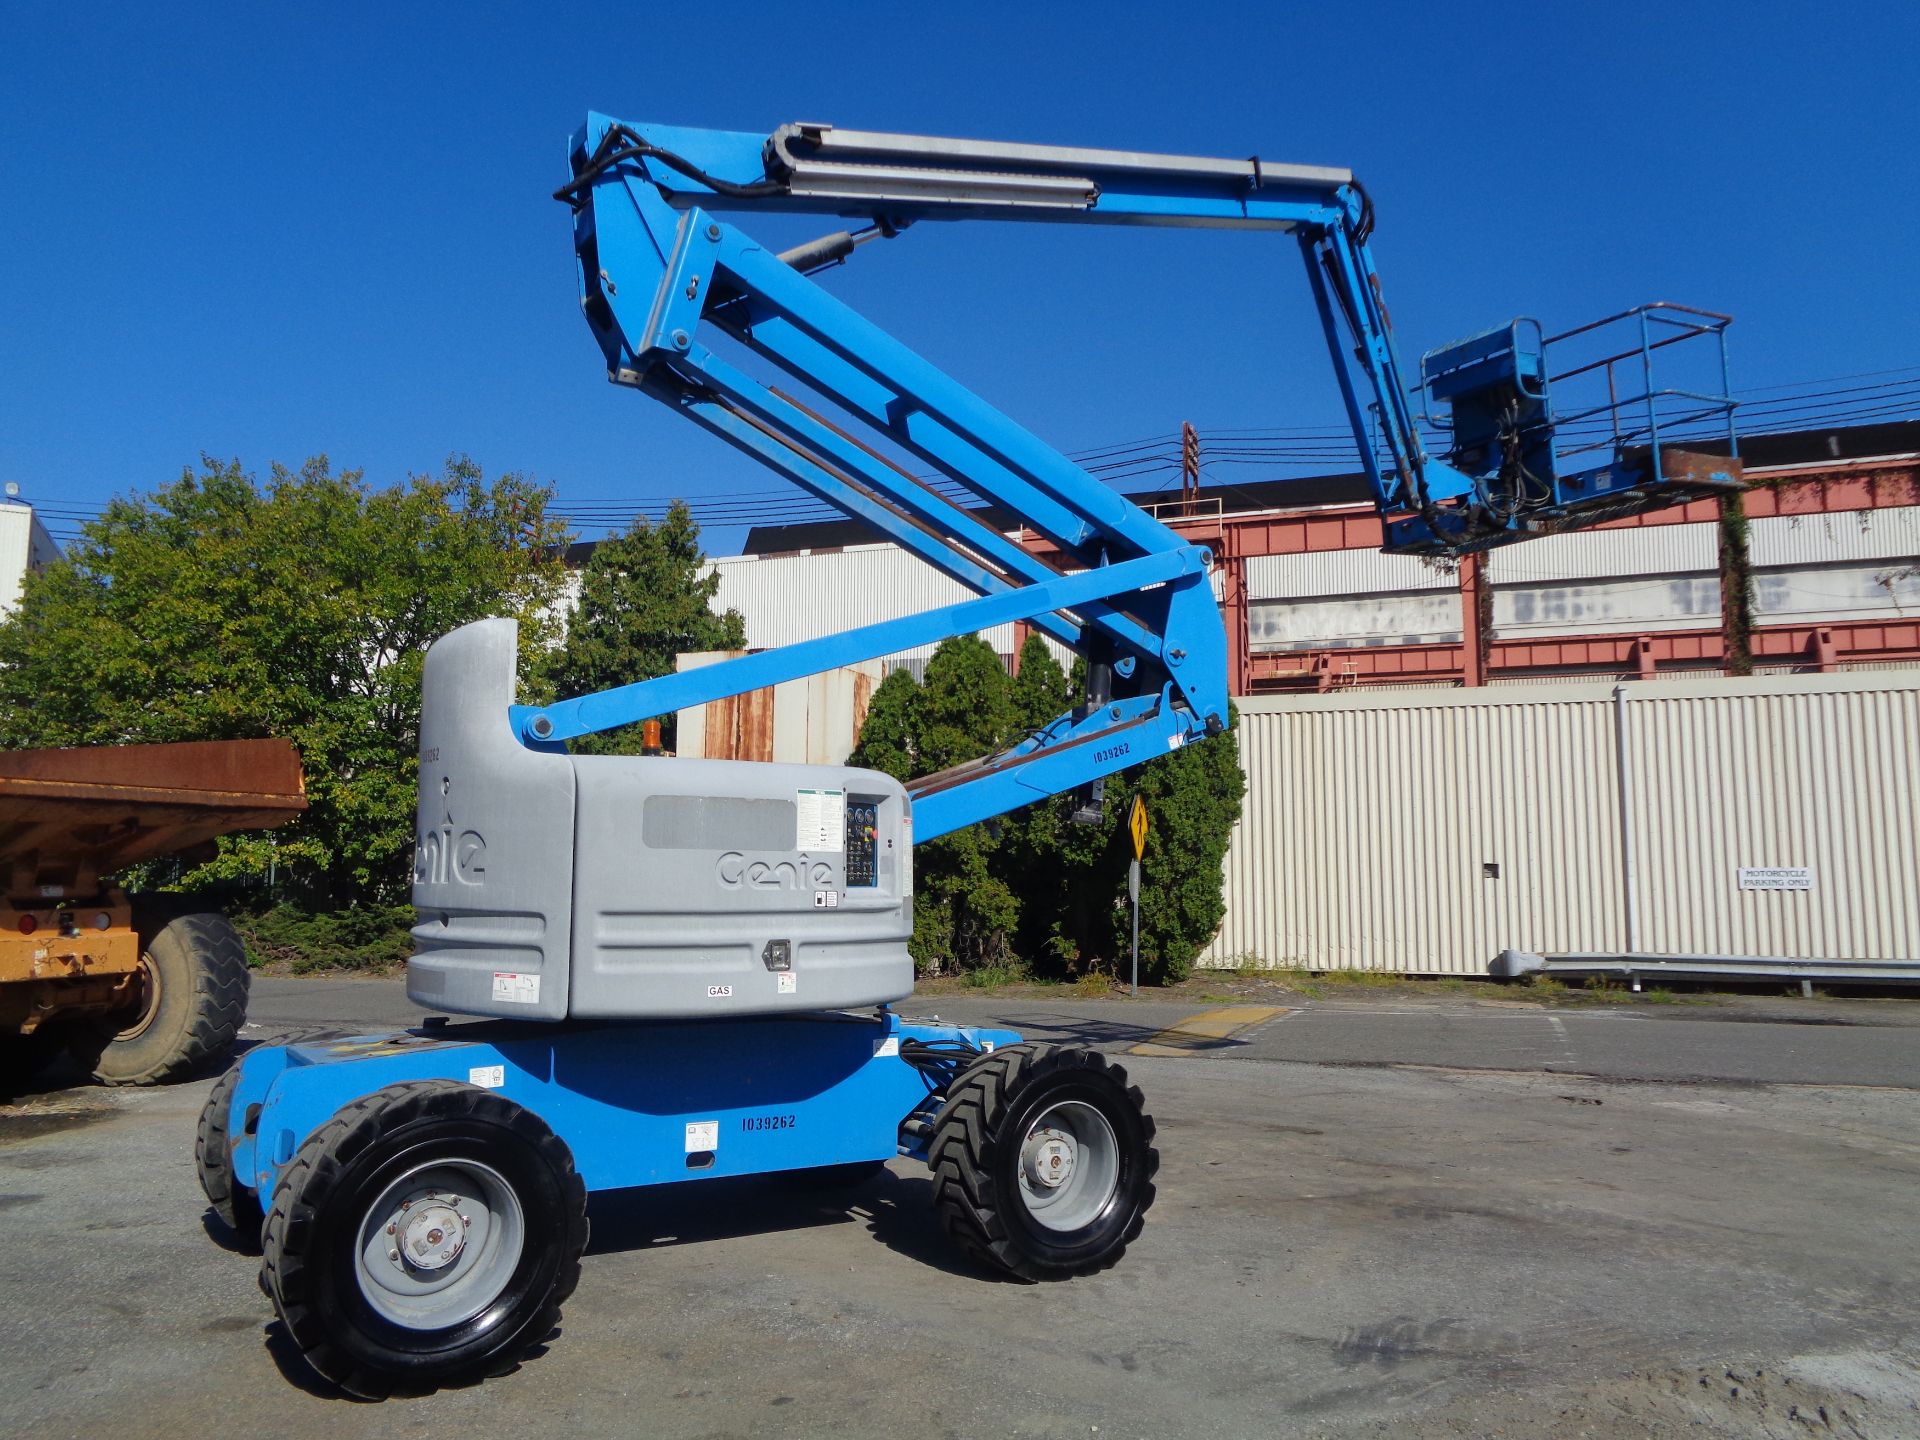 2008 Genie Z60 34 Articulating Boom Man Aerial Lift - Image 13 of 20